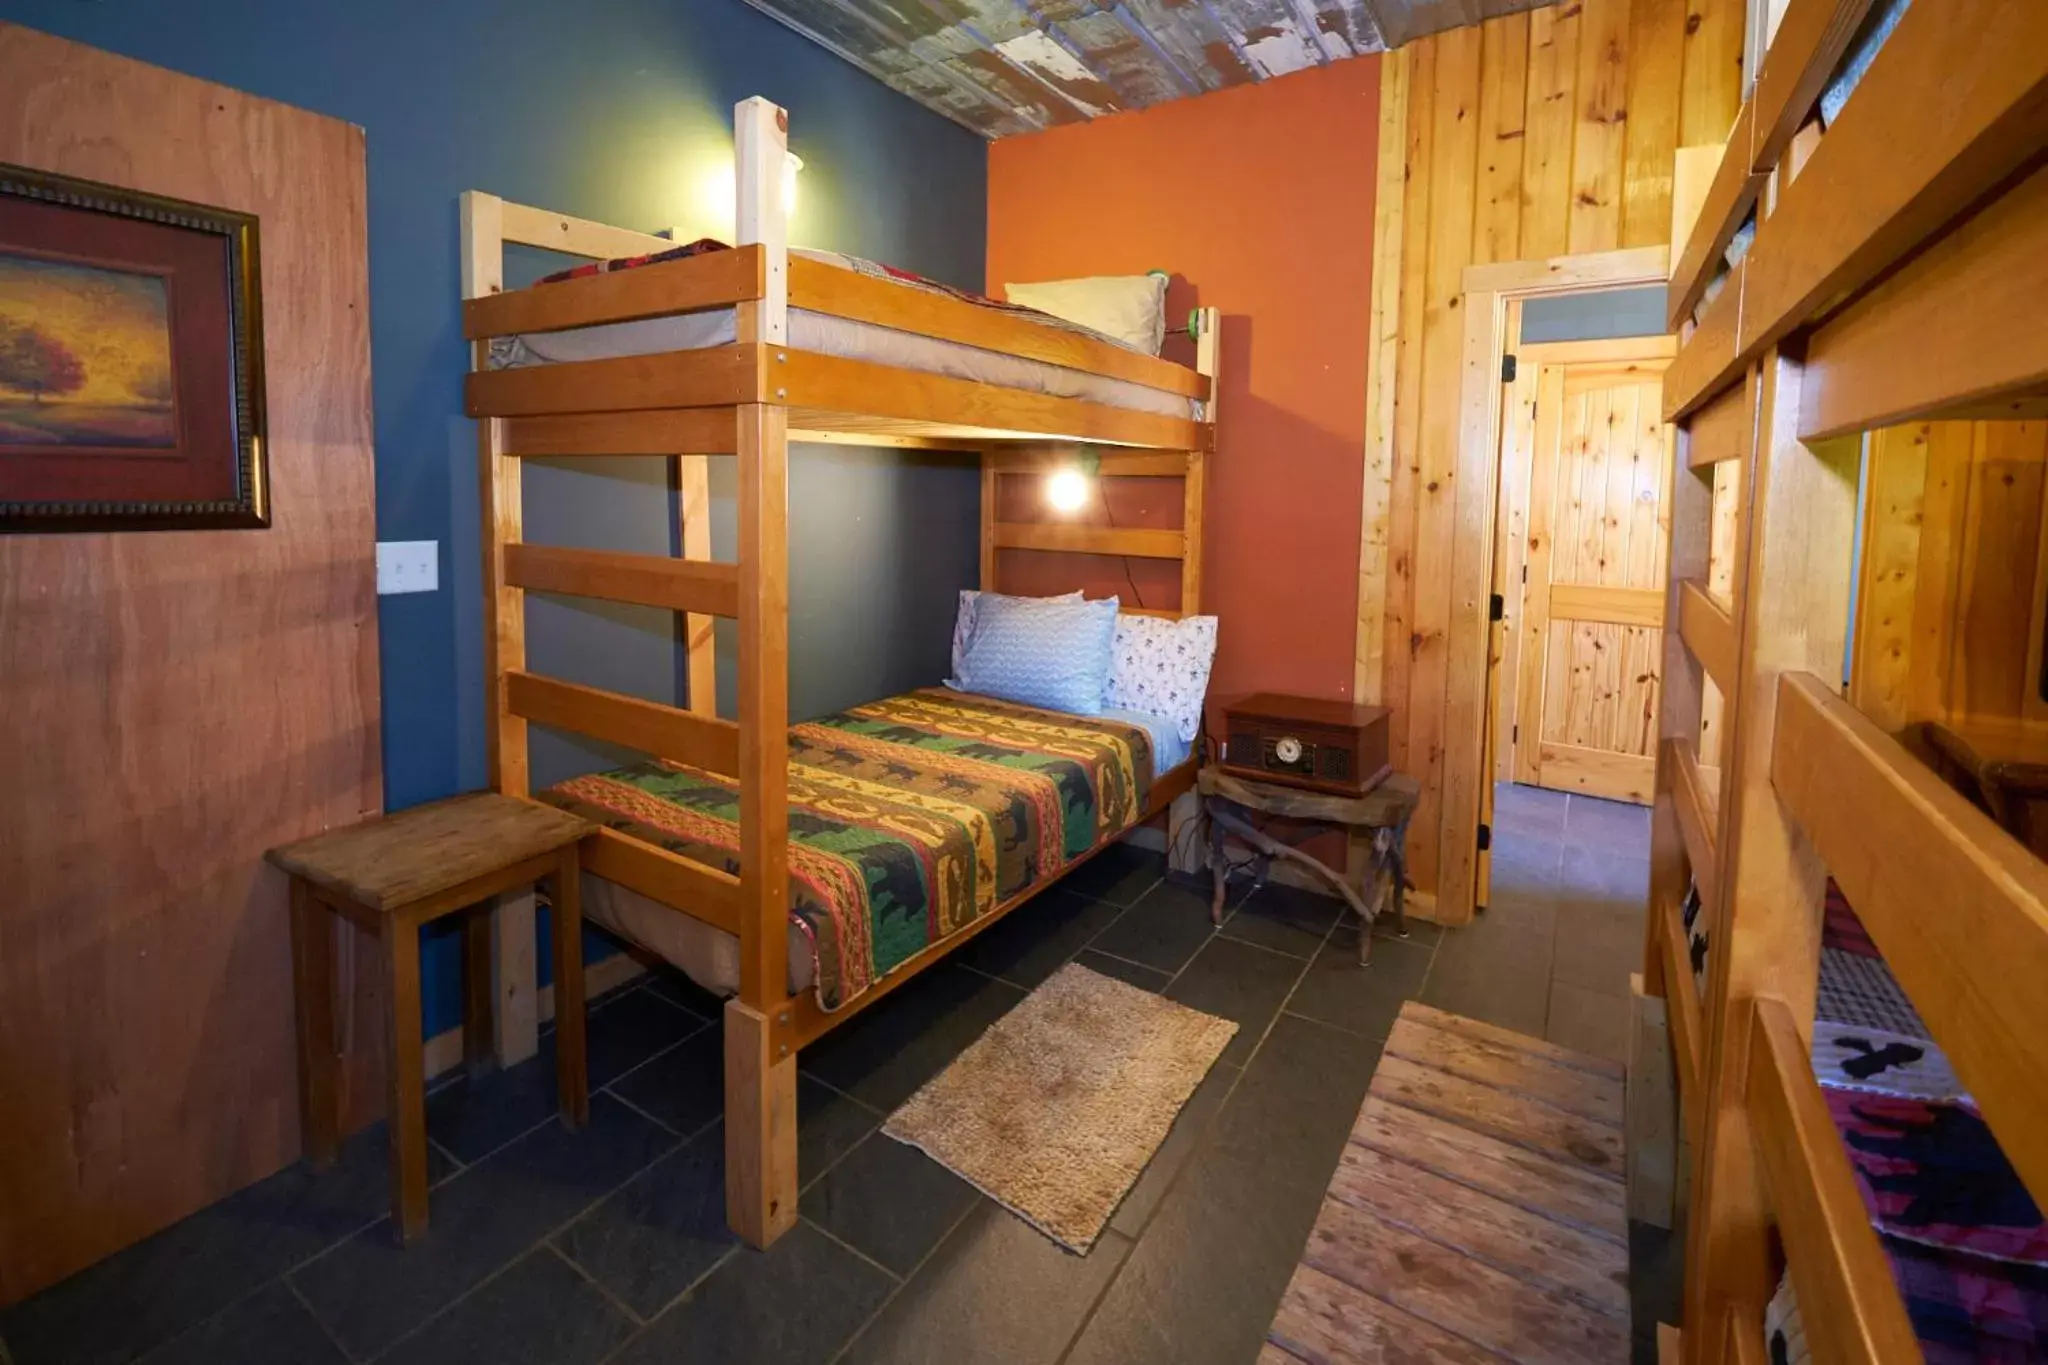 Bunk Bed in Creekwalk Inn Bed and Breakfast with Cabins